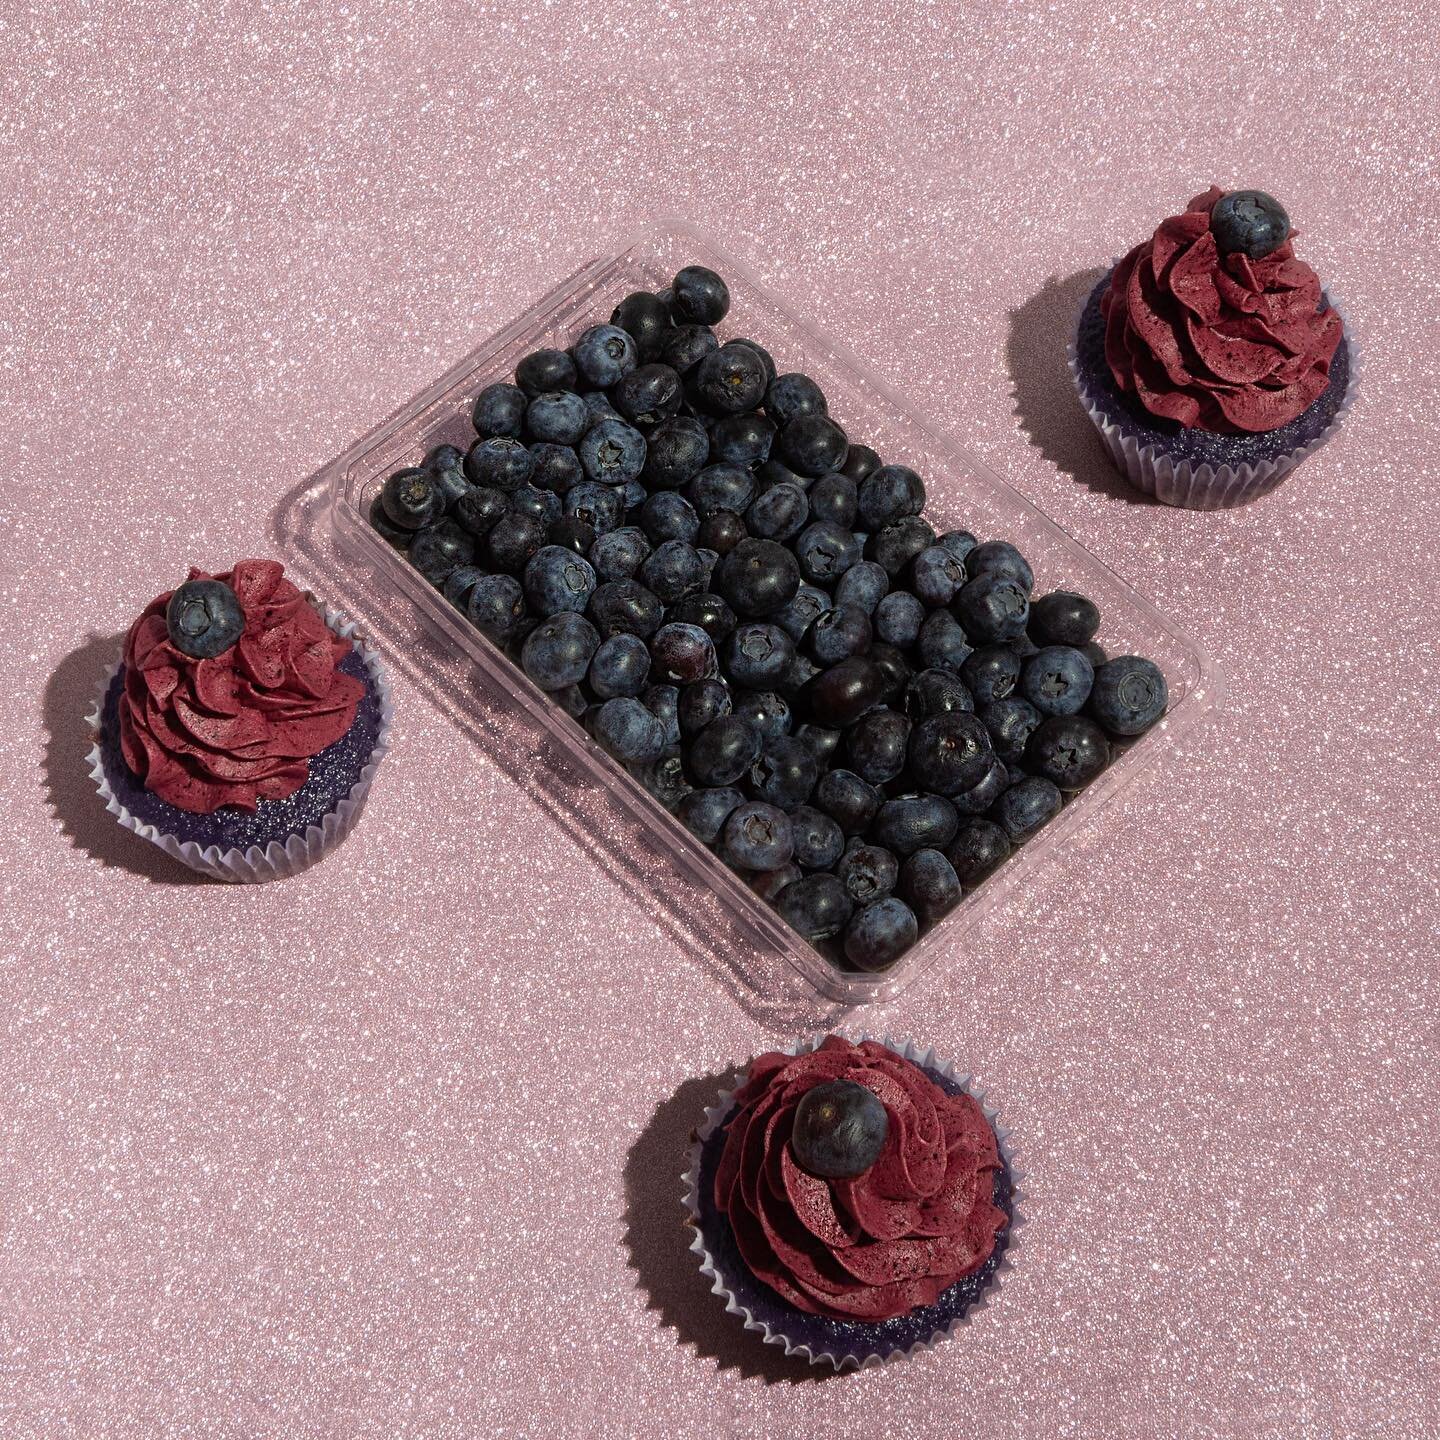 Don&rsquo;t let the rain stop you from having a ~berry~ good day 🍇🍷💜 .
.
.
.
.
.
#phillybaker #phillybakery #boozy #cupcakes #eatadelphia #foodphotography #philly #phillygram #foodie #foodgasm #foodpic #foodgram #dessertlover #cake #cakesofinstagr